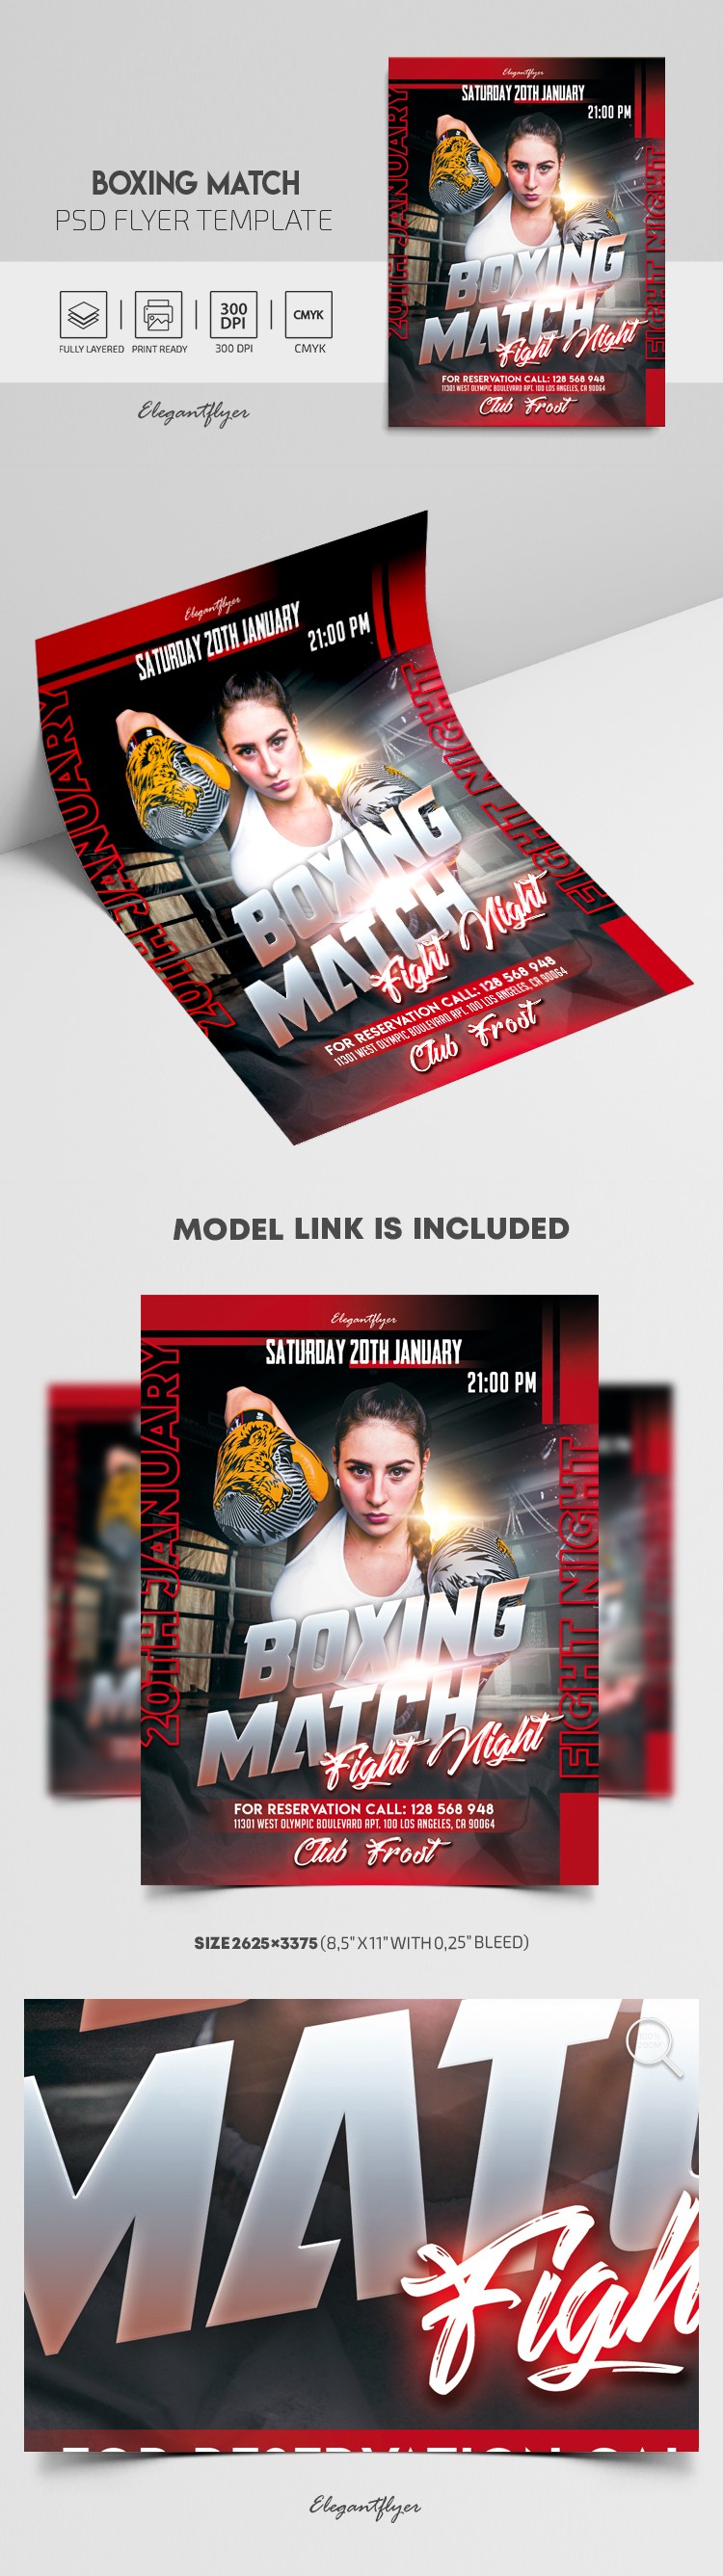 Boxing Match - Free Flyer PSD Template